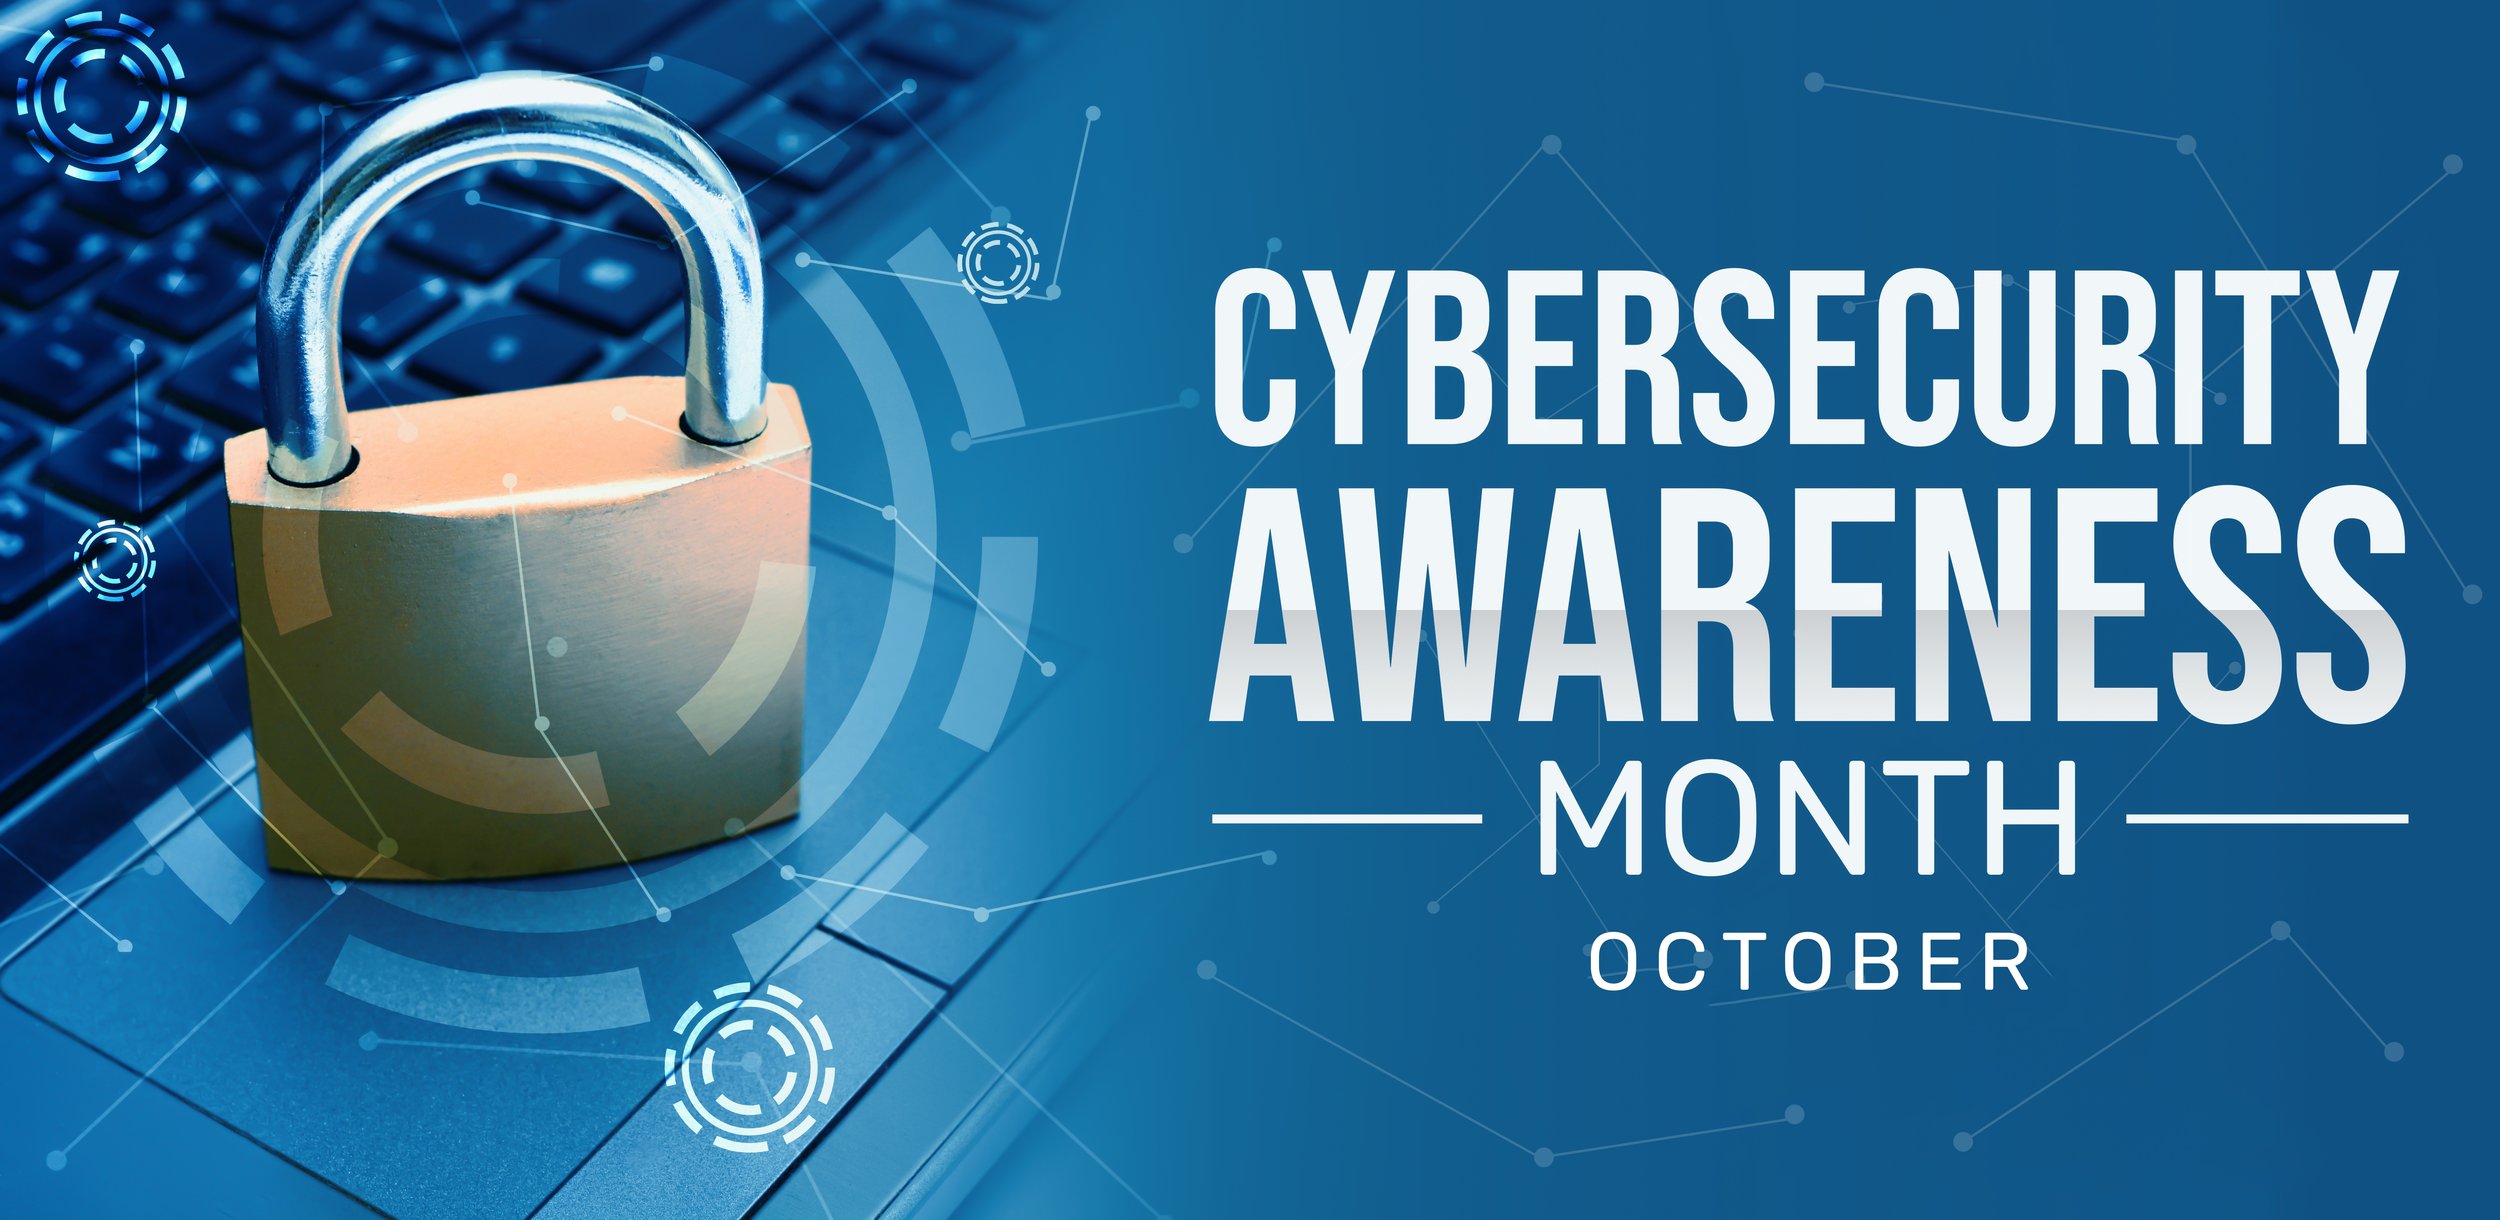 Cyber,Security,Awareness,Month,Observed,In,October,To,Protect,Your